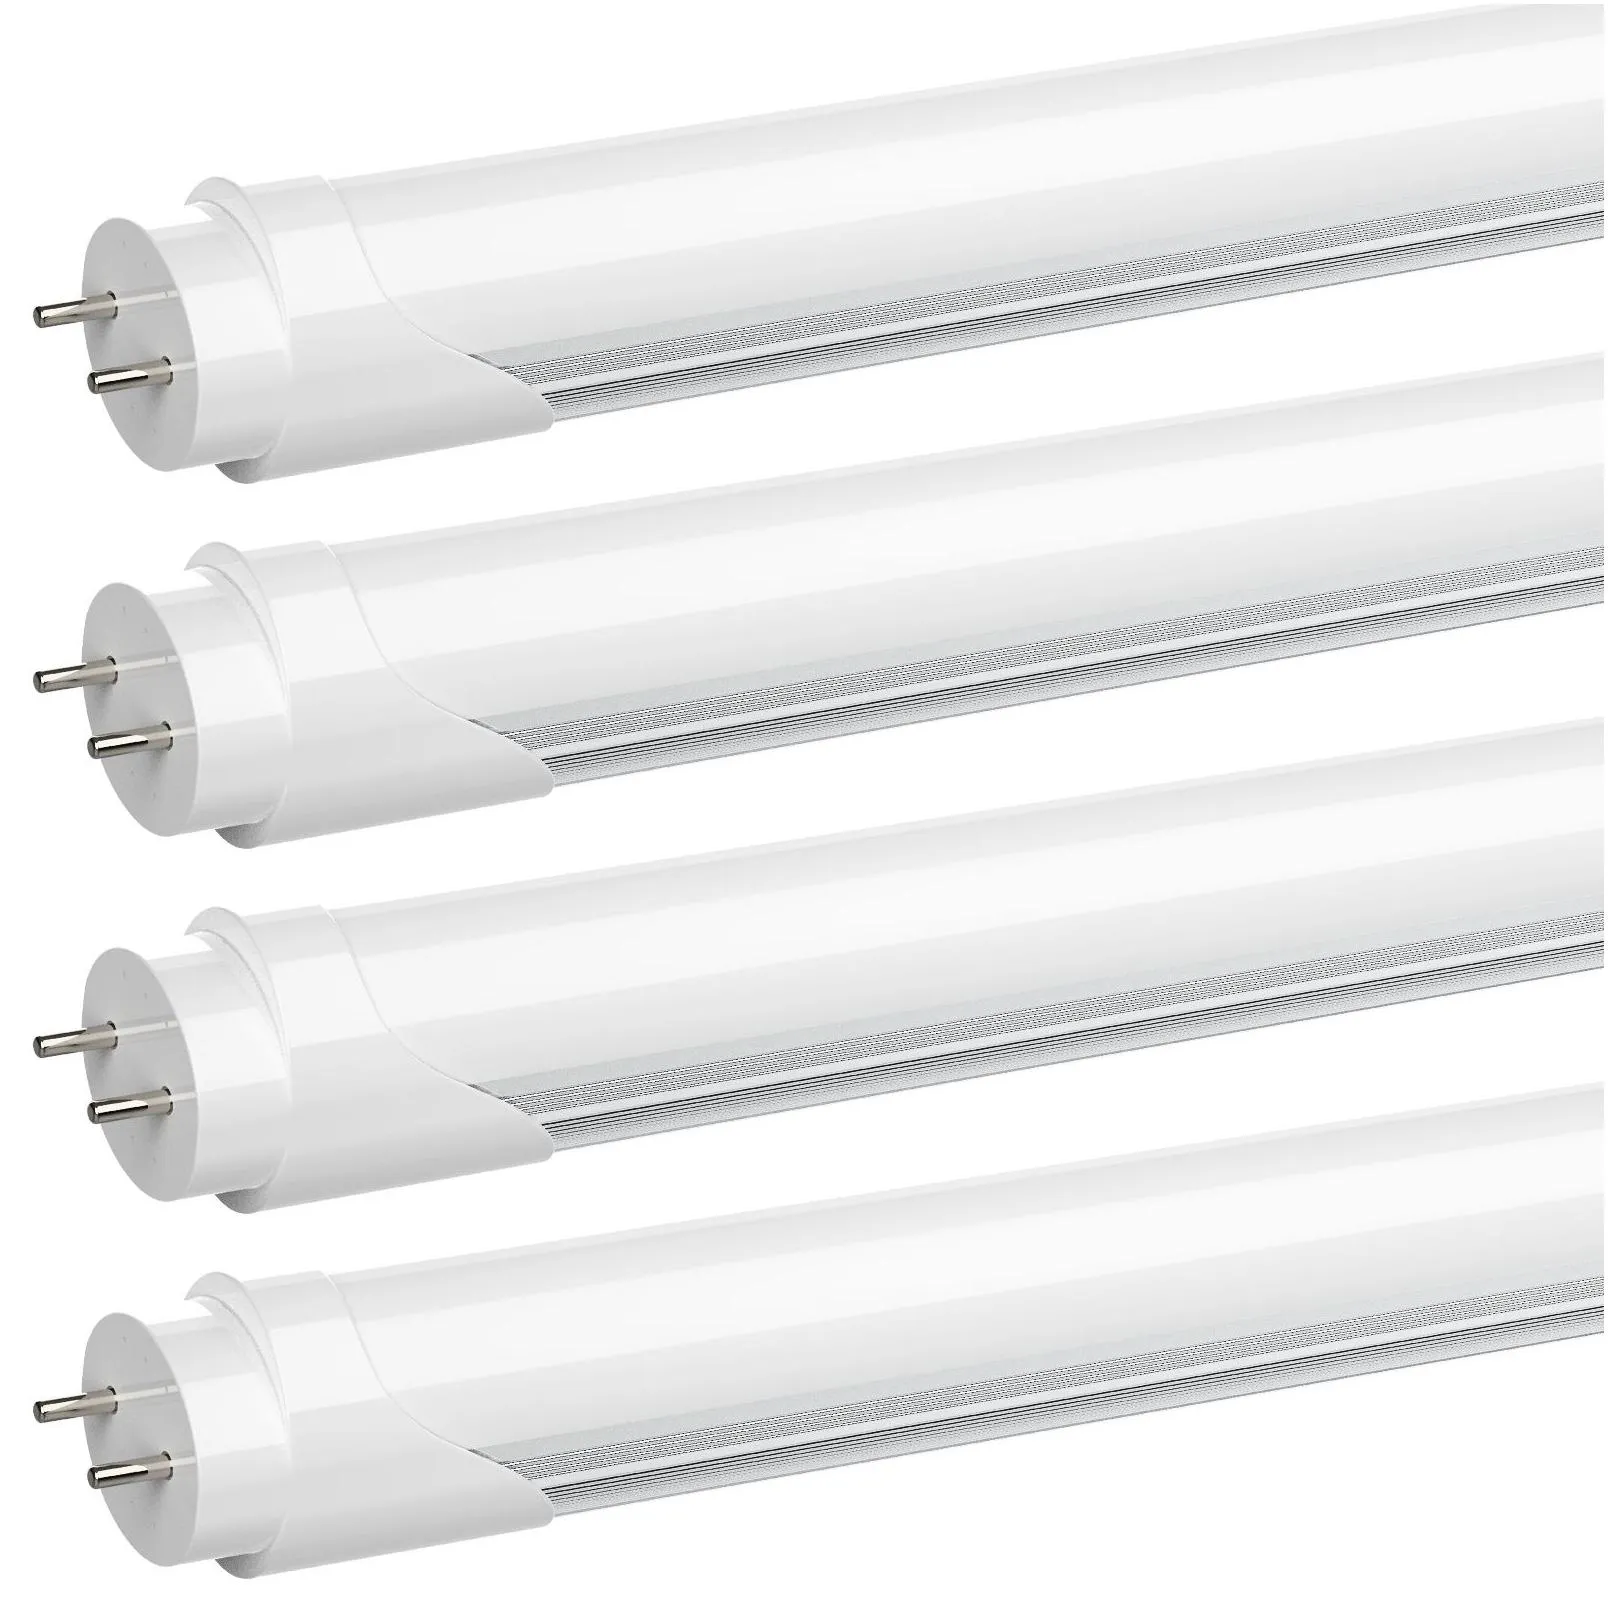 Led Tubes Stock In Us 4Ft Led Tube 28W Dural Row Warm Cool White 1200Mm 1.2M Smd2835 192Pcs Super Bright Fluorescent Bbs Ac85-265V Dro Dhxf3